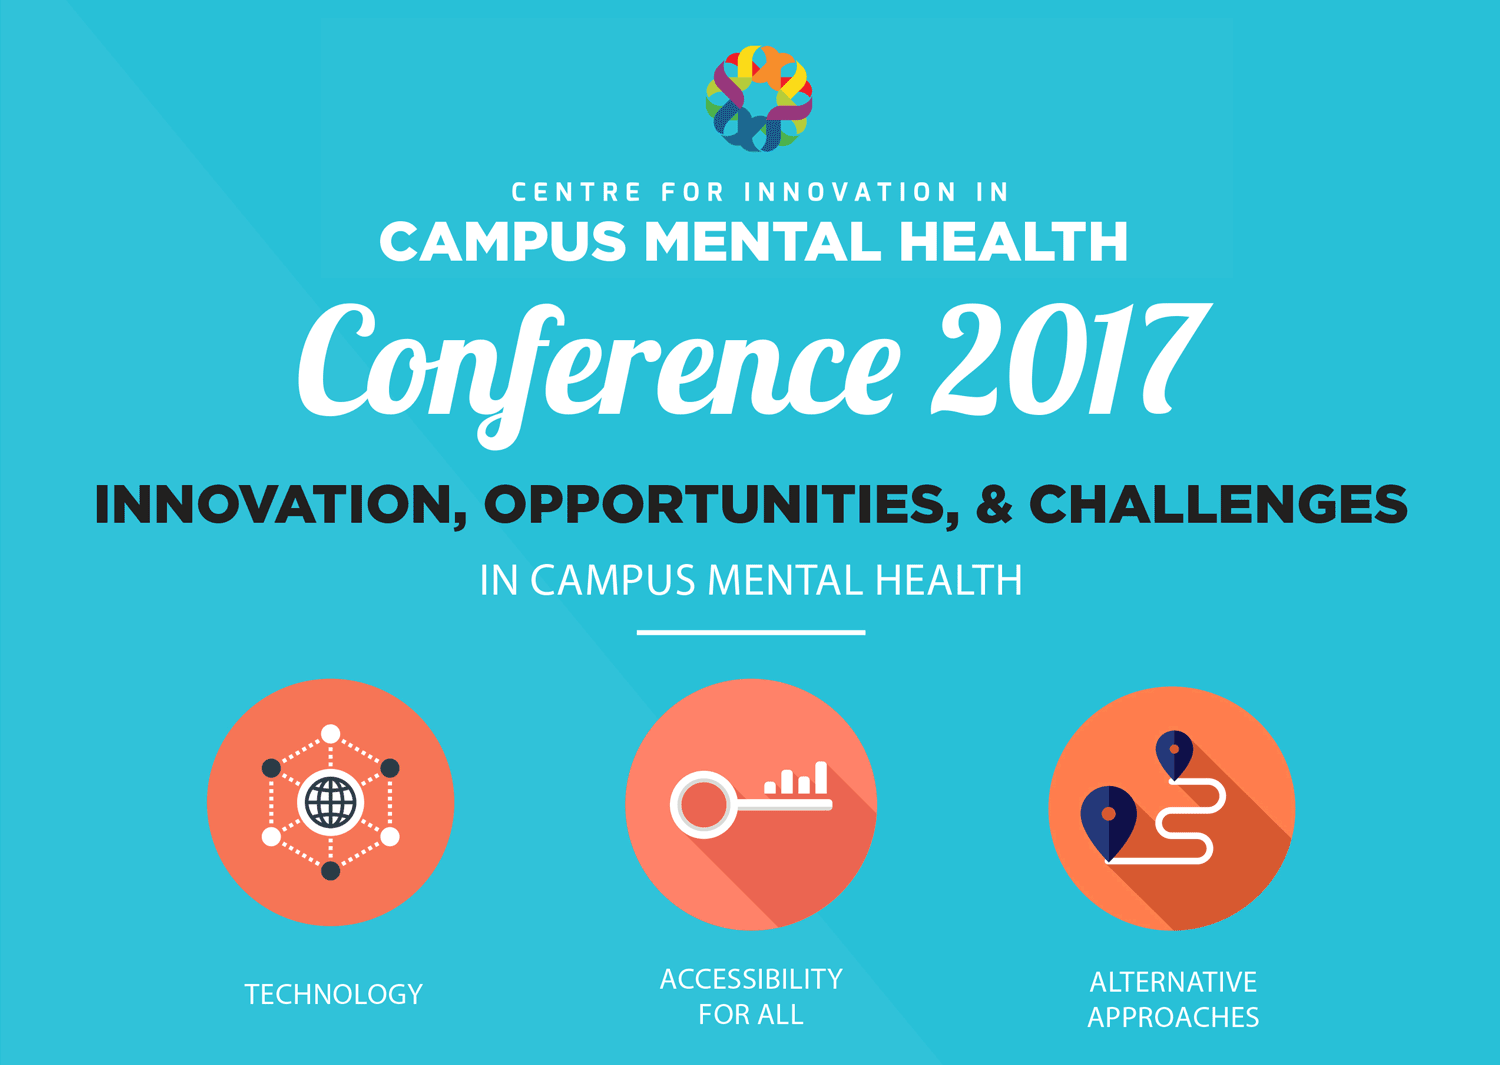 Conference 2017 | Innovation, Opportunities & Challenges